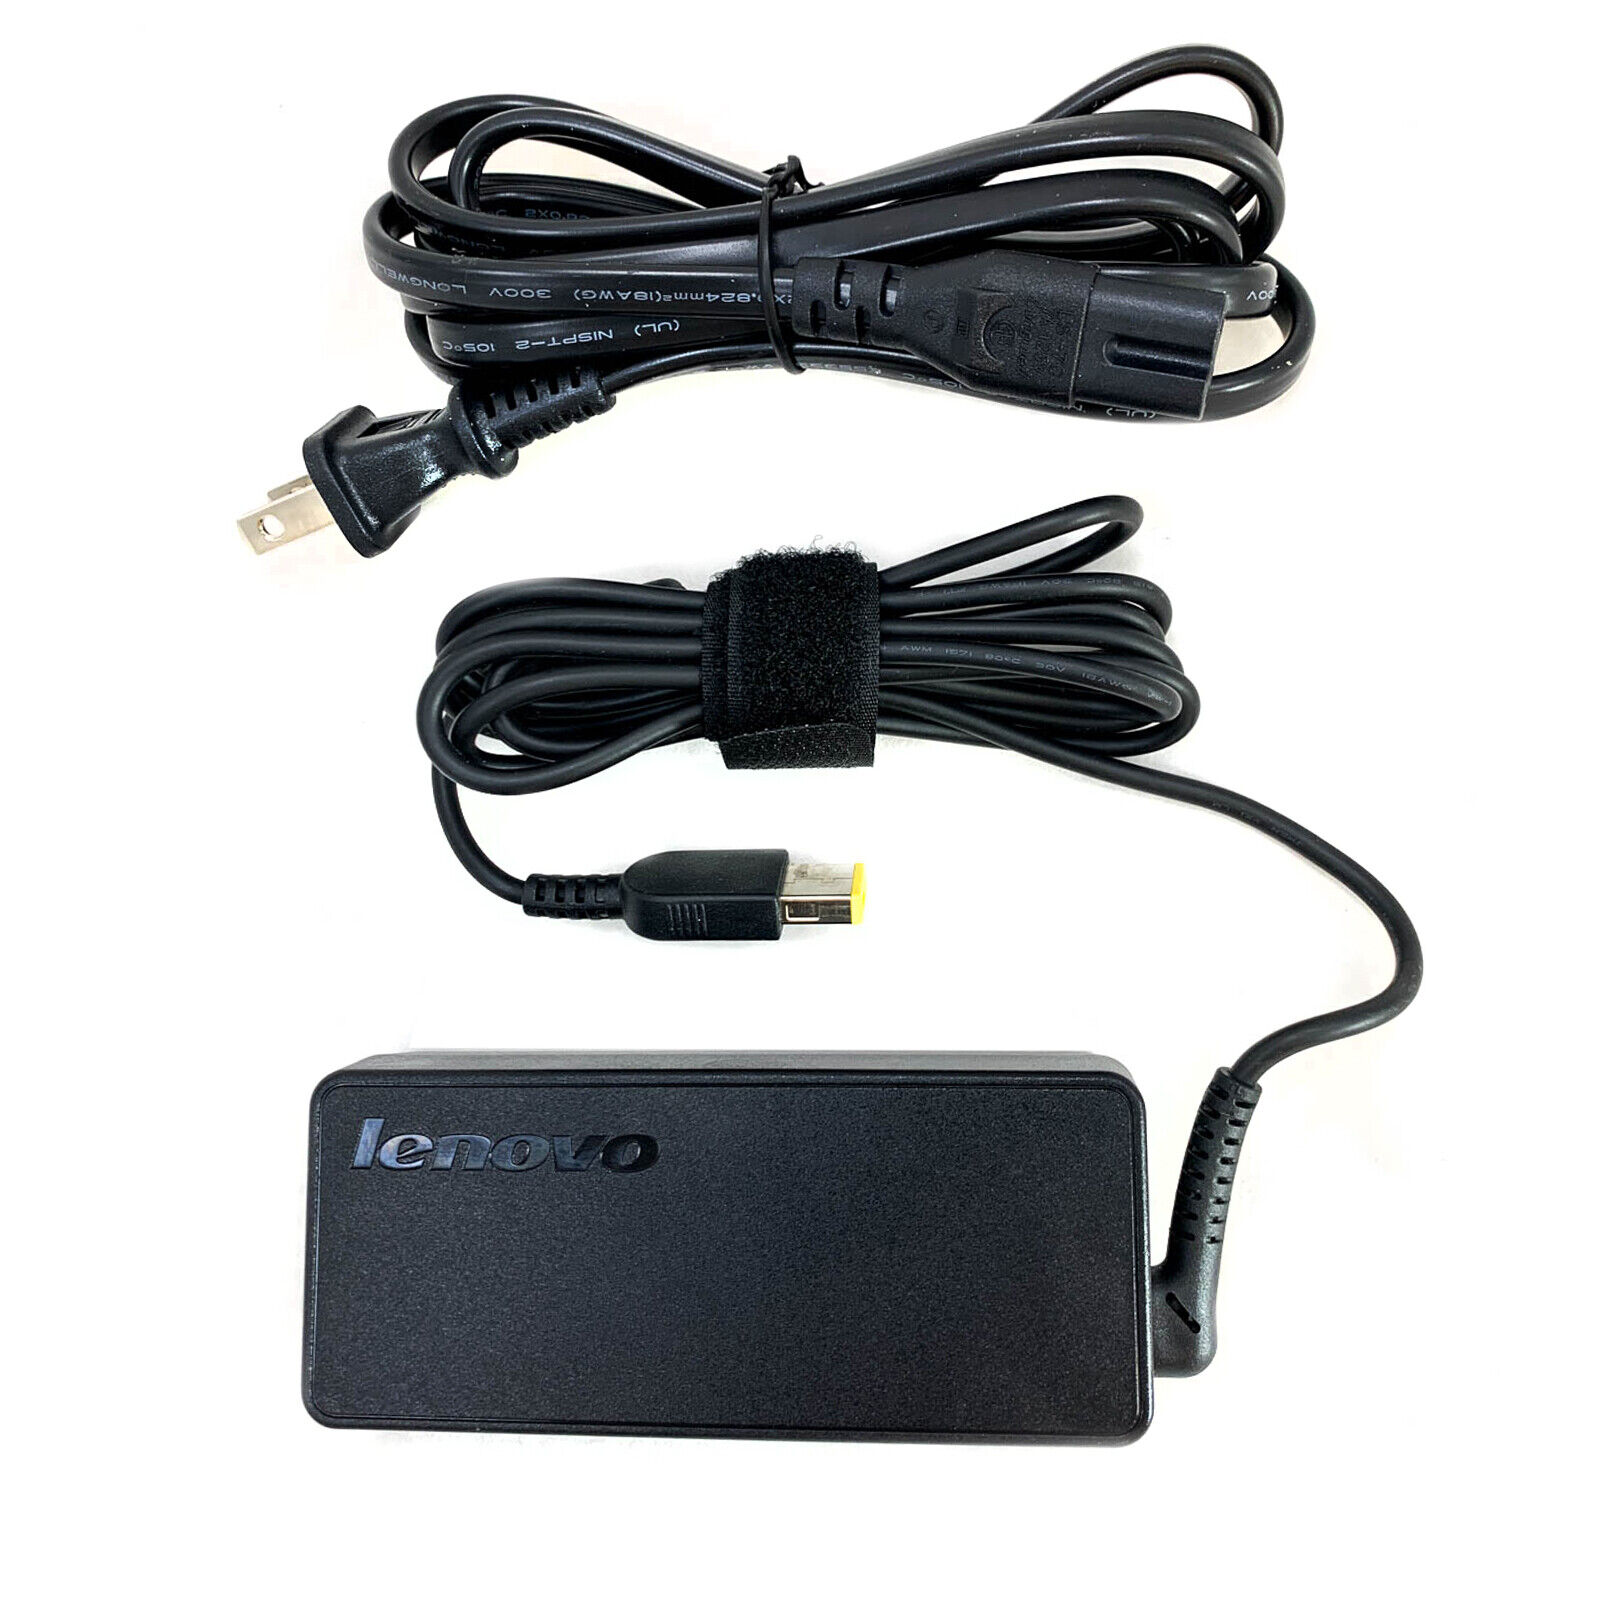 Genuine Lenovo AC Power Supply Adapter Charger for Laptop ThinkPad Yoga 460 w/PC